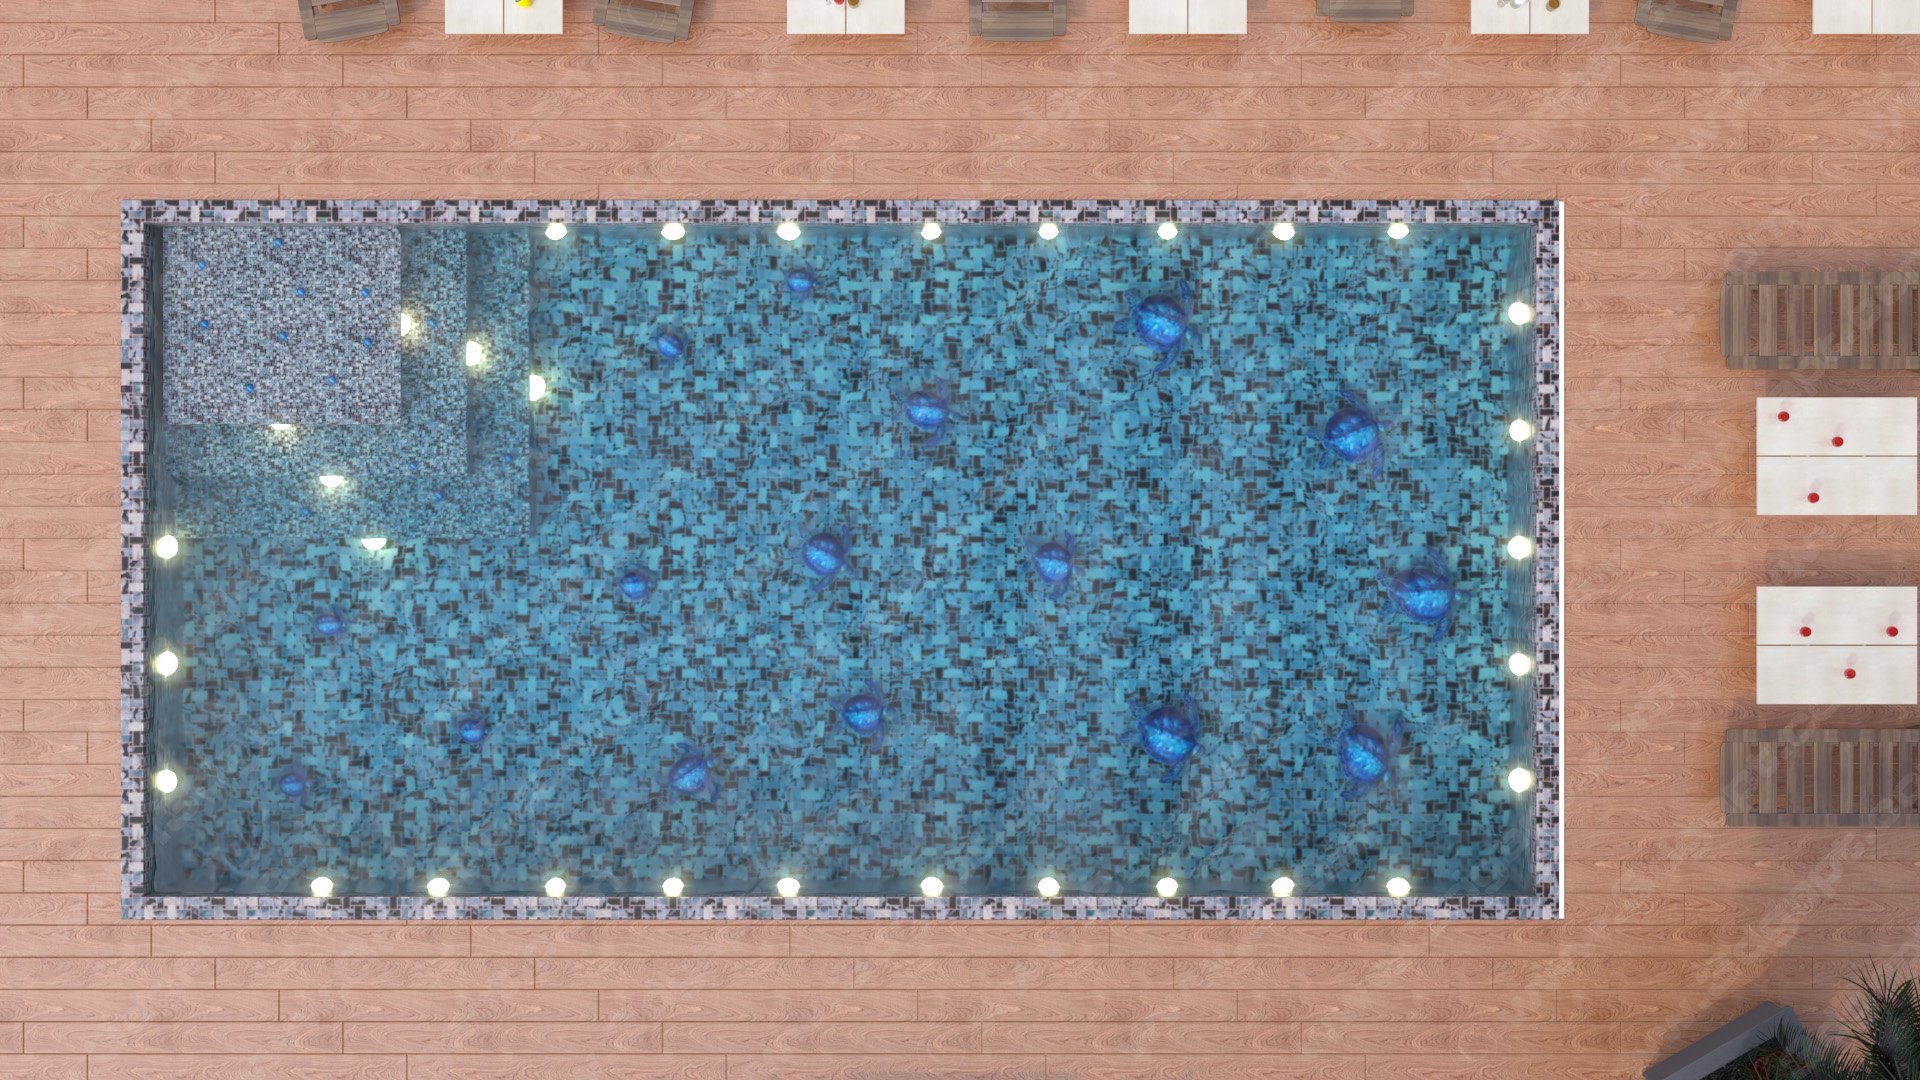 Pool with 3d turtles on the floor - Alternative version - 27